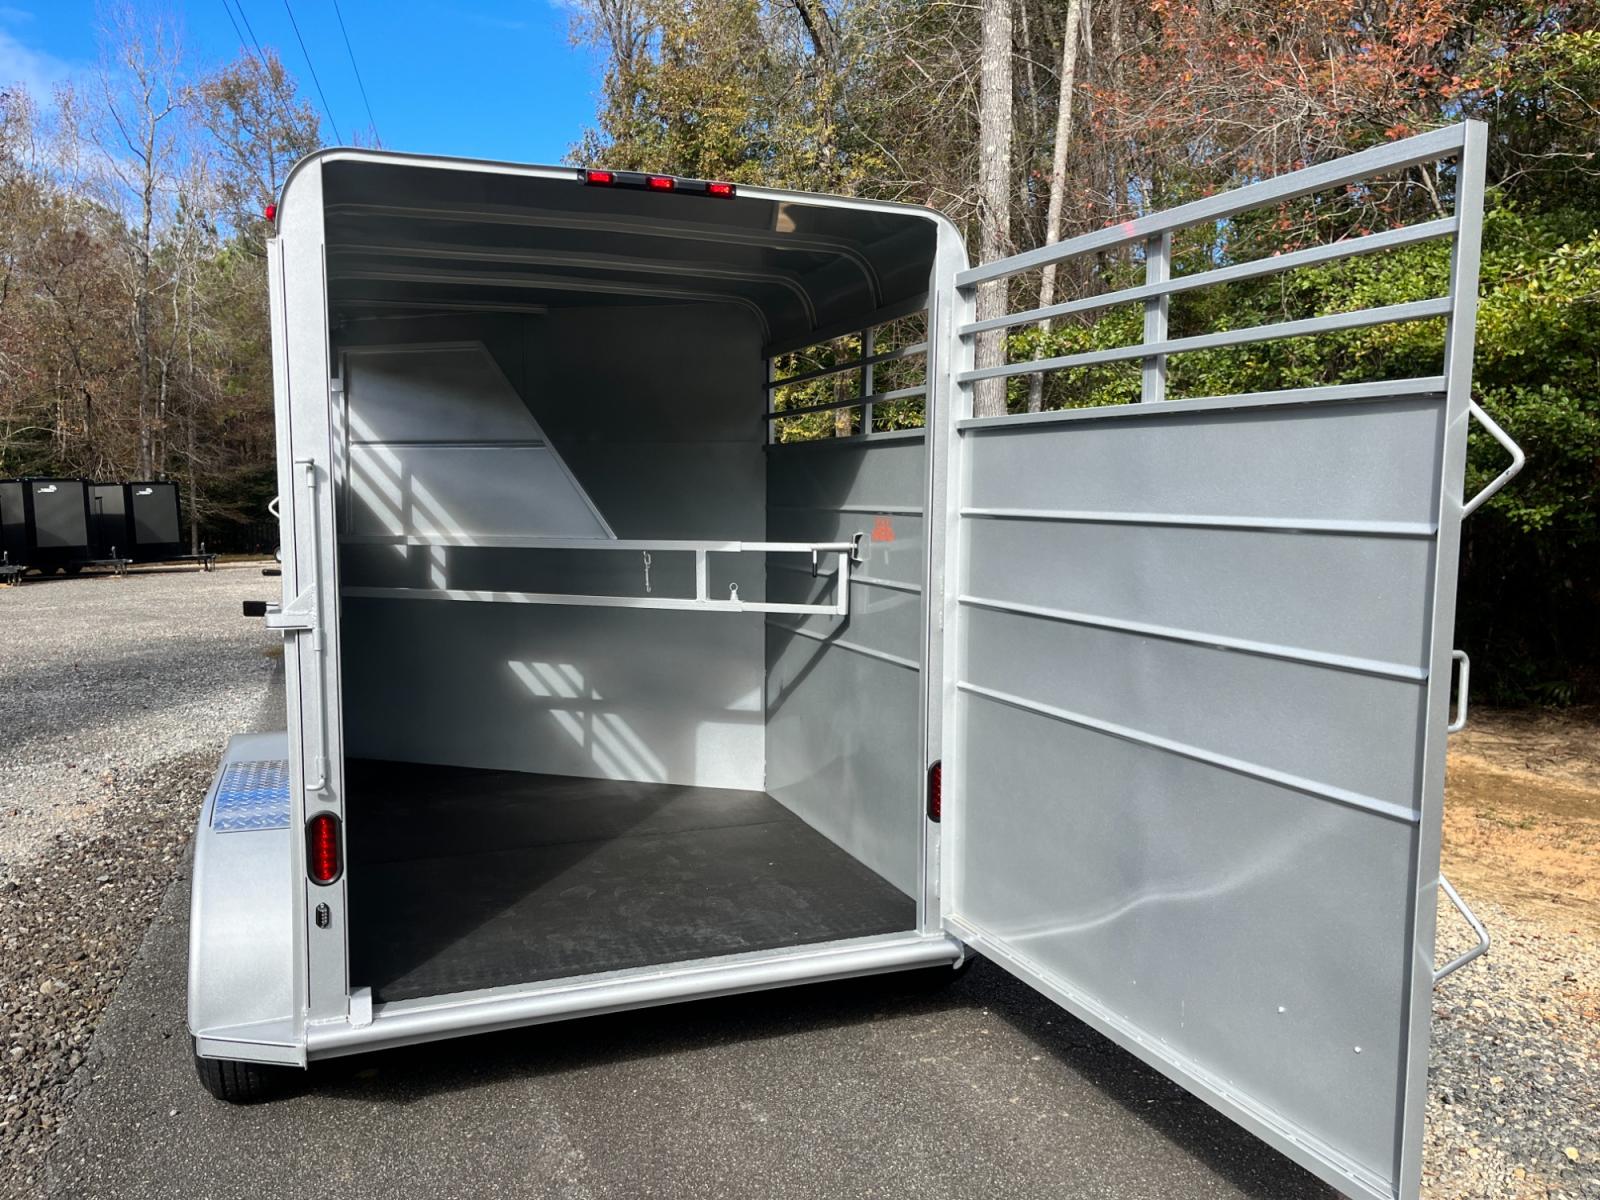 2023 Silver Metallic Calico 2 Horse Slant , located at 1330 Rainey Rd., Macon, 31220, (478) 960-1044, 32.845638, -83.778687 - Brand New 2023 Model 2 Horse Slant Calico Brand Trailer! 6ft Wide X 13ft Long Deluxe Model Tandem Axle Trailer! Easy Close Slant Divider Latch! 16